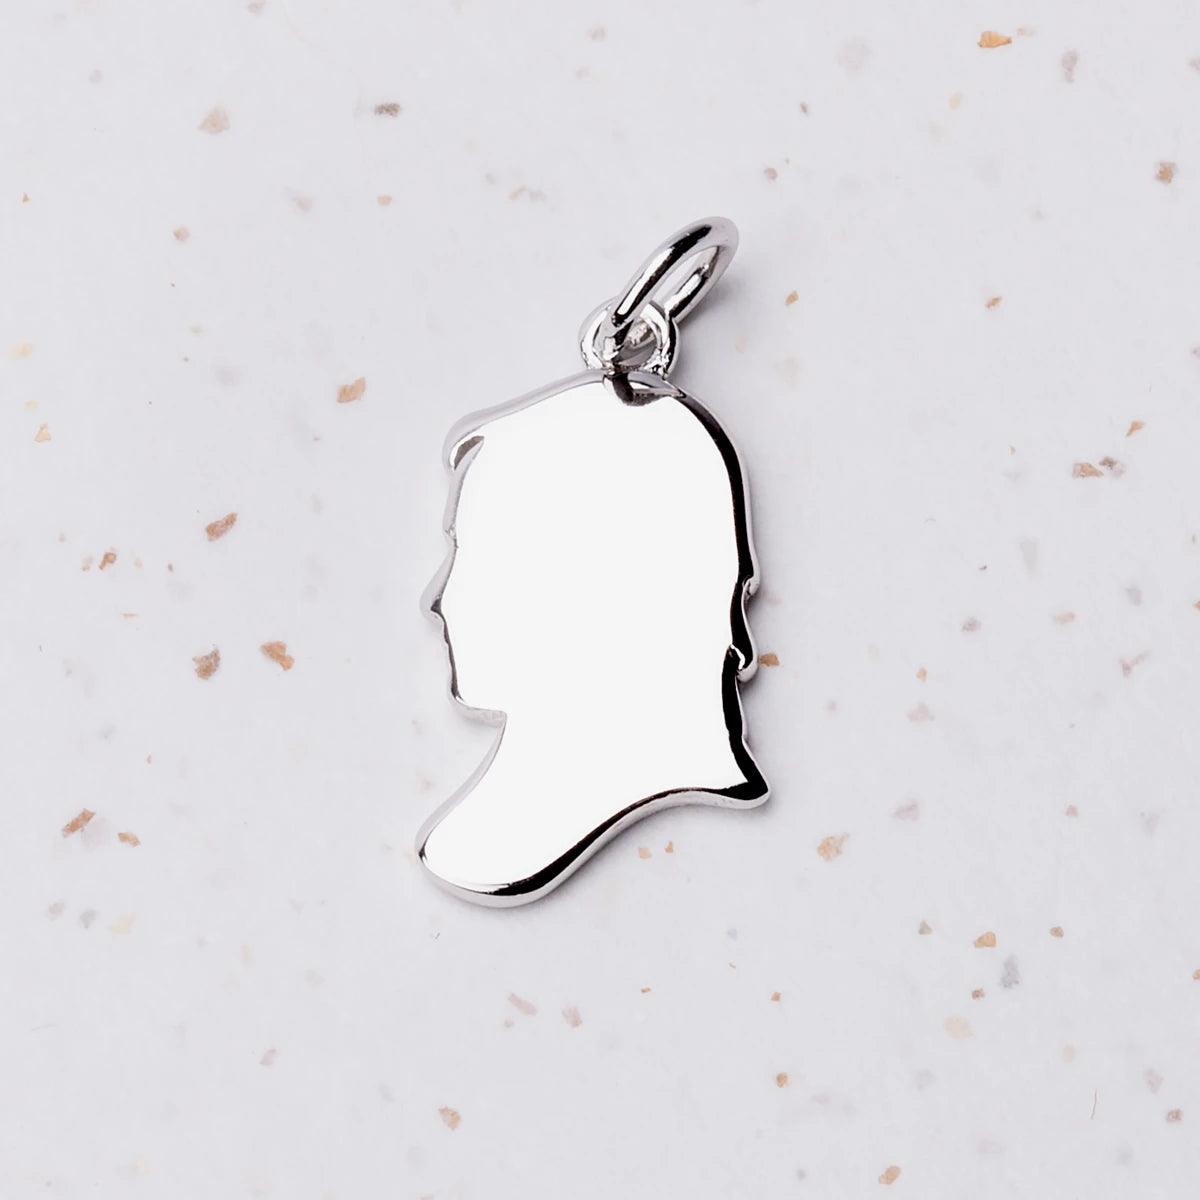 Mr. Darcy Inscribed Silhouette Charm